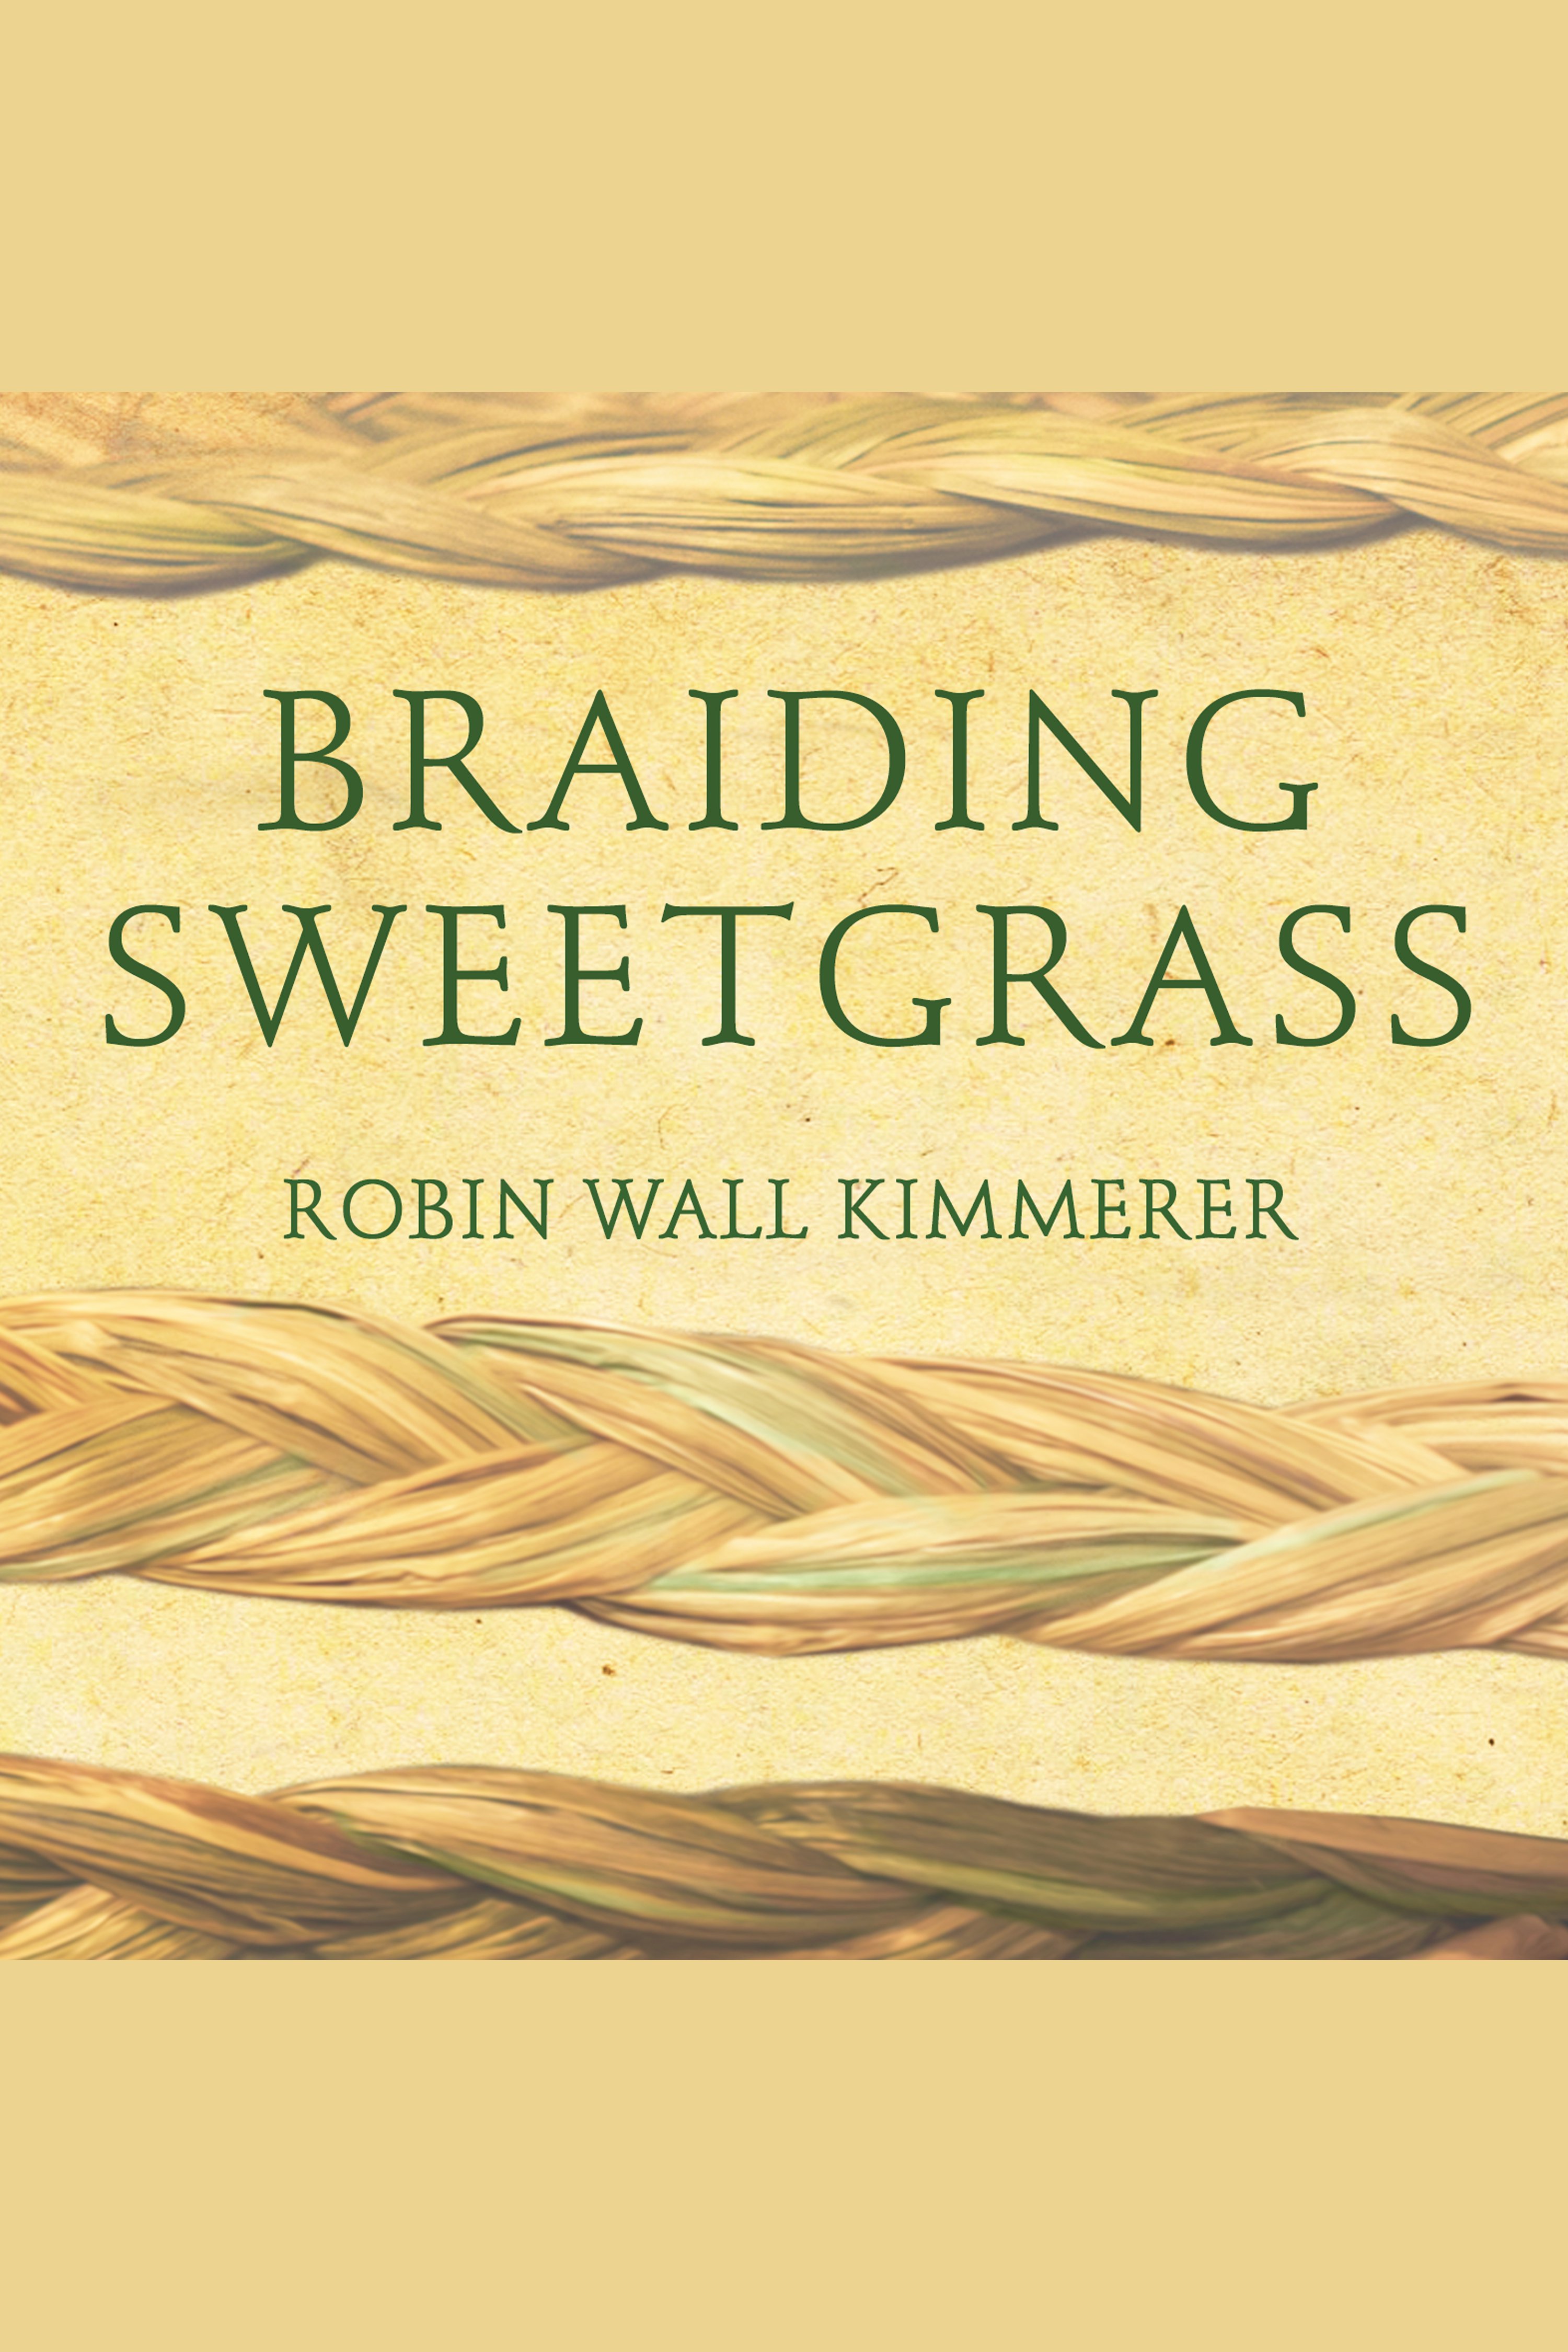 Braiding sweetgrass : indigenous wisdom, scientific knowledge and the teachings of plants